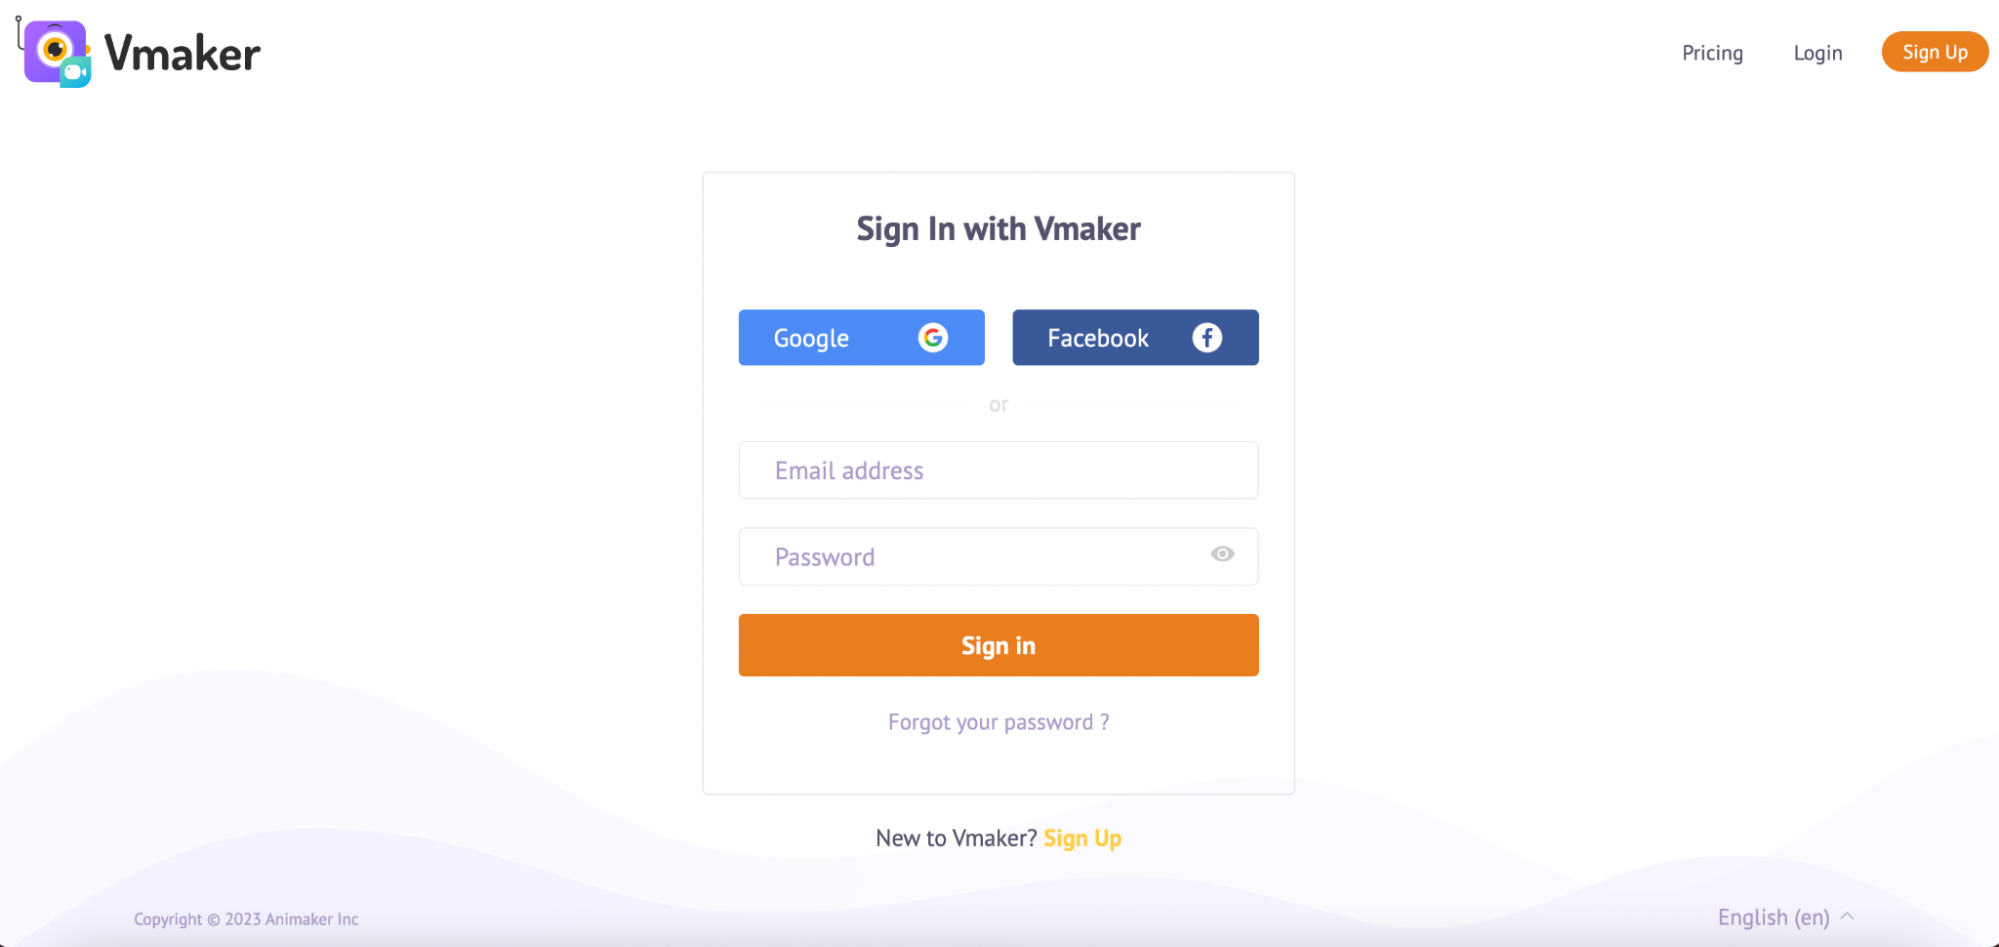 sign up for Vmaker